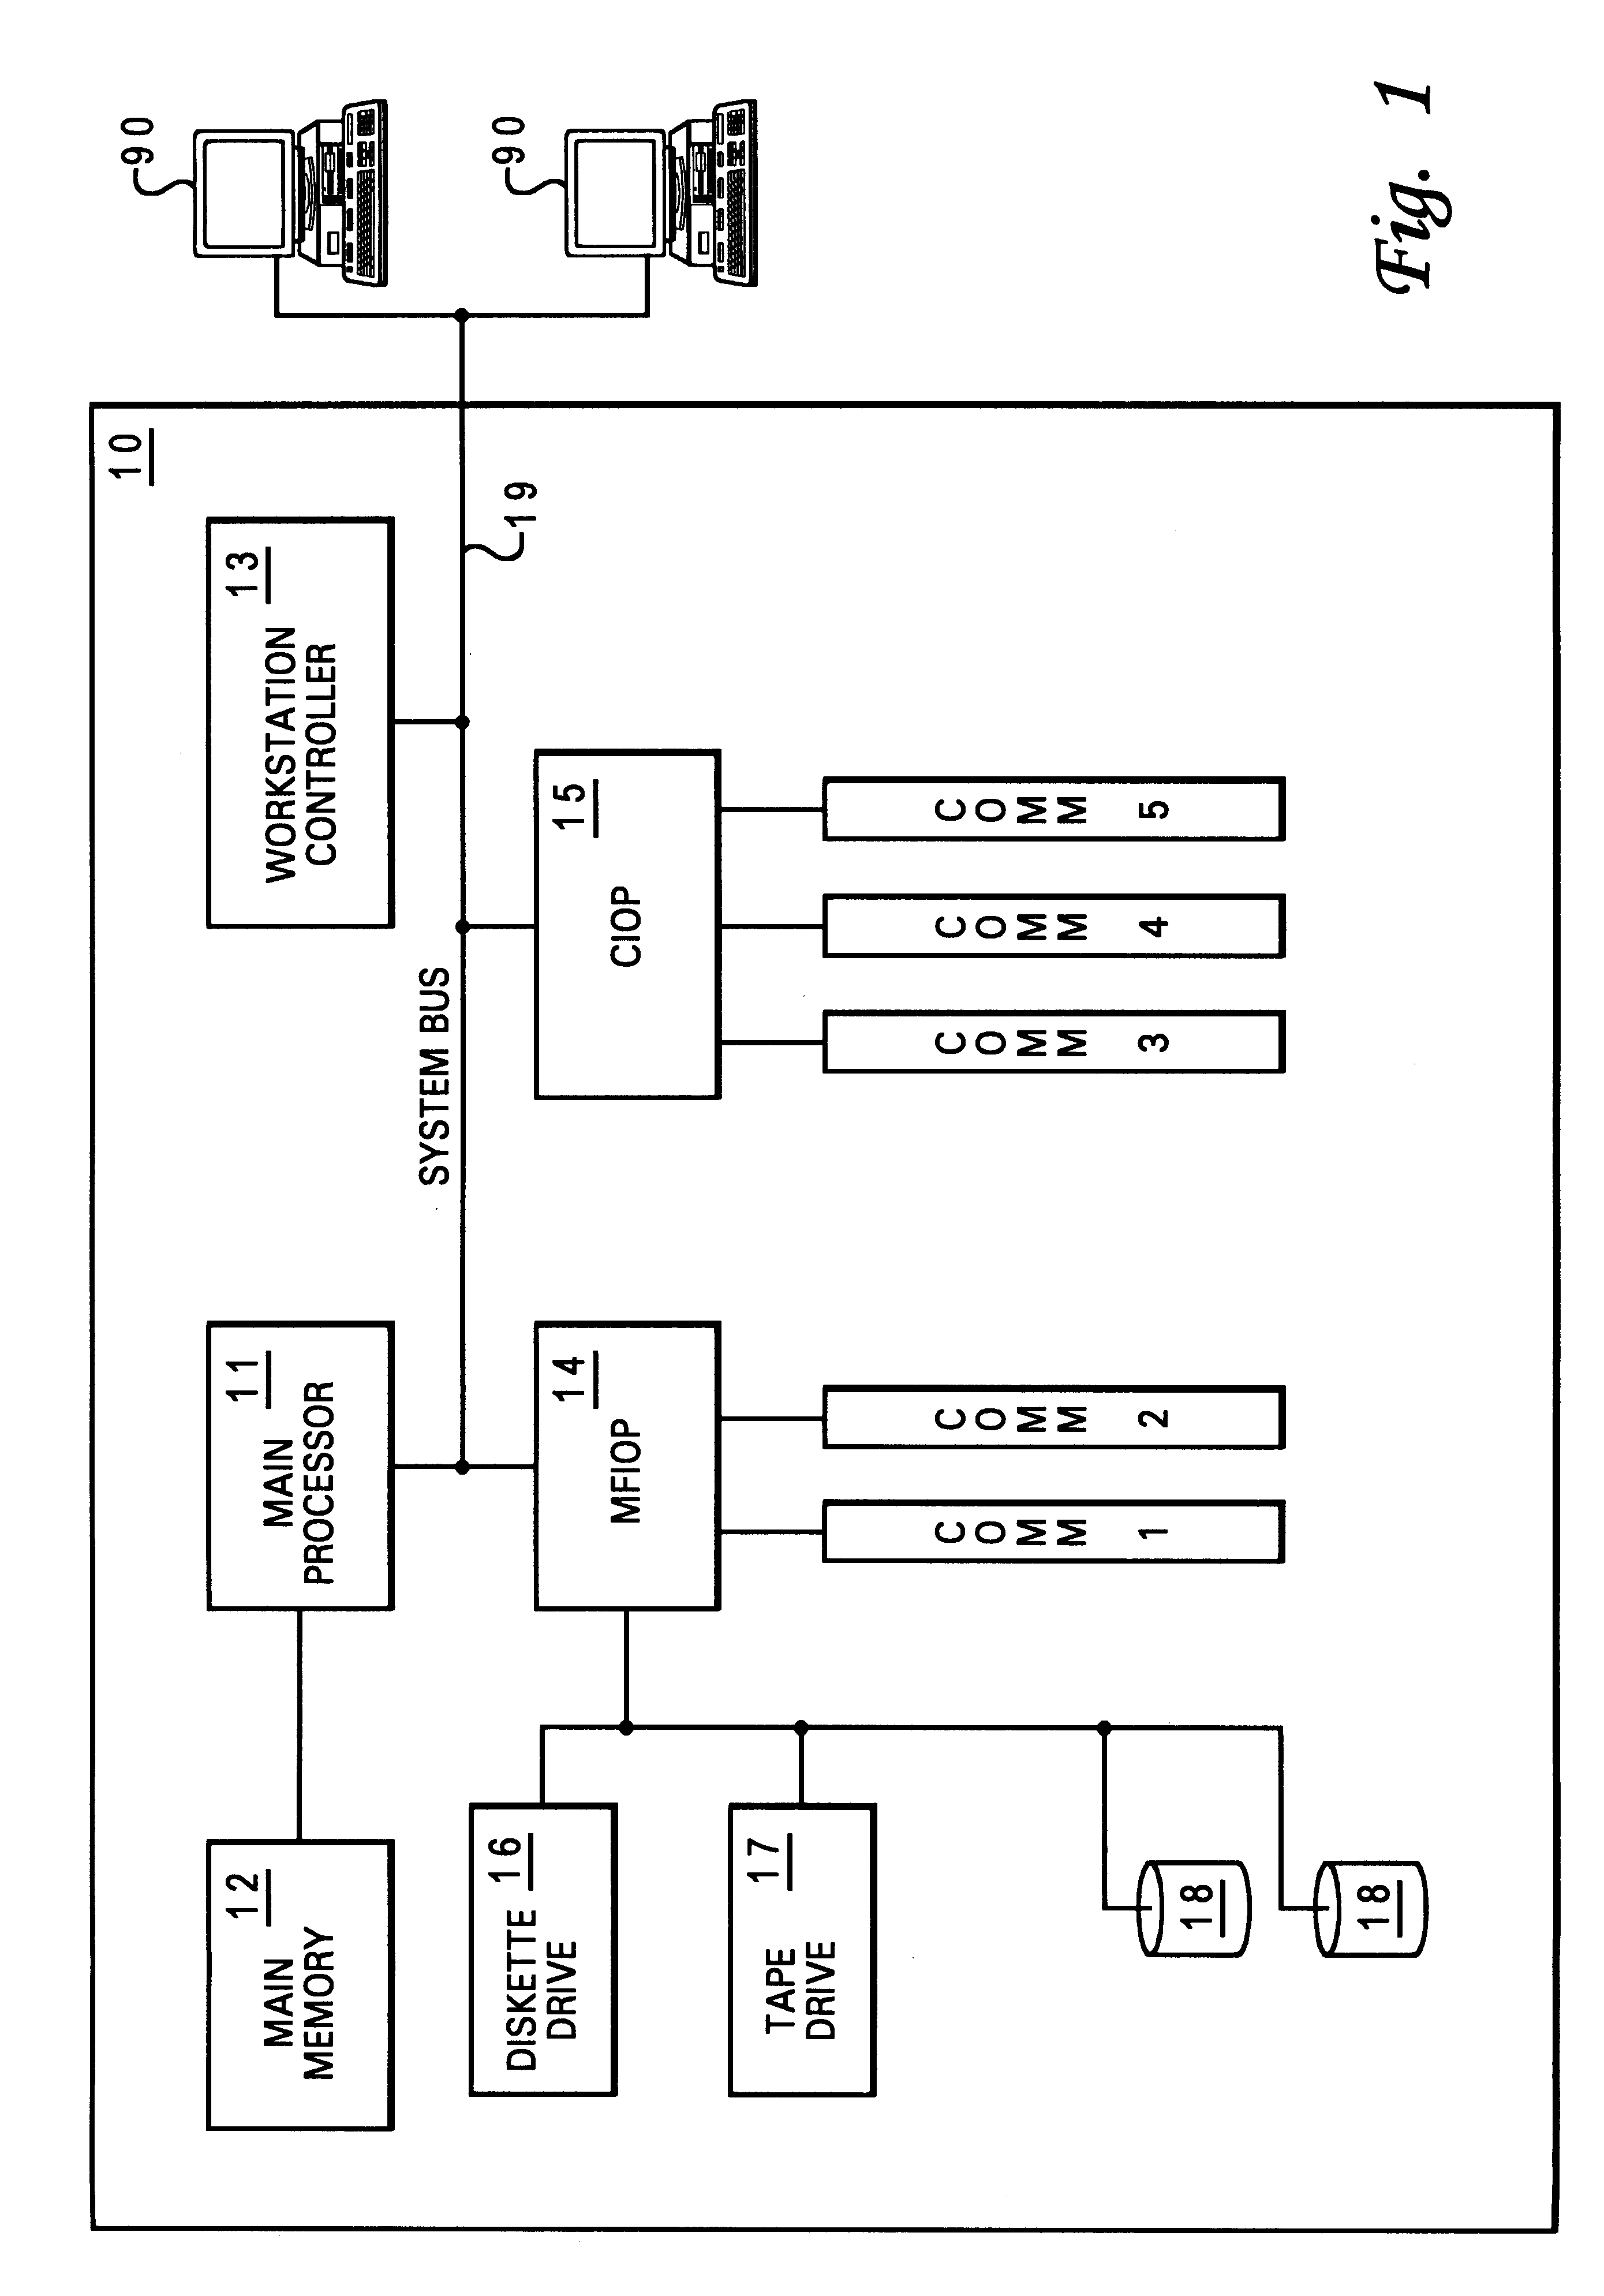 Method and system for performing timing analysis on an integrated circuit design